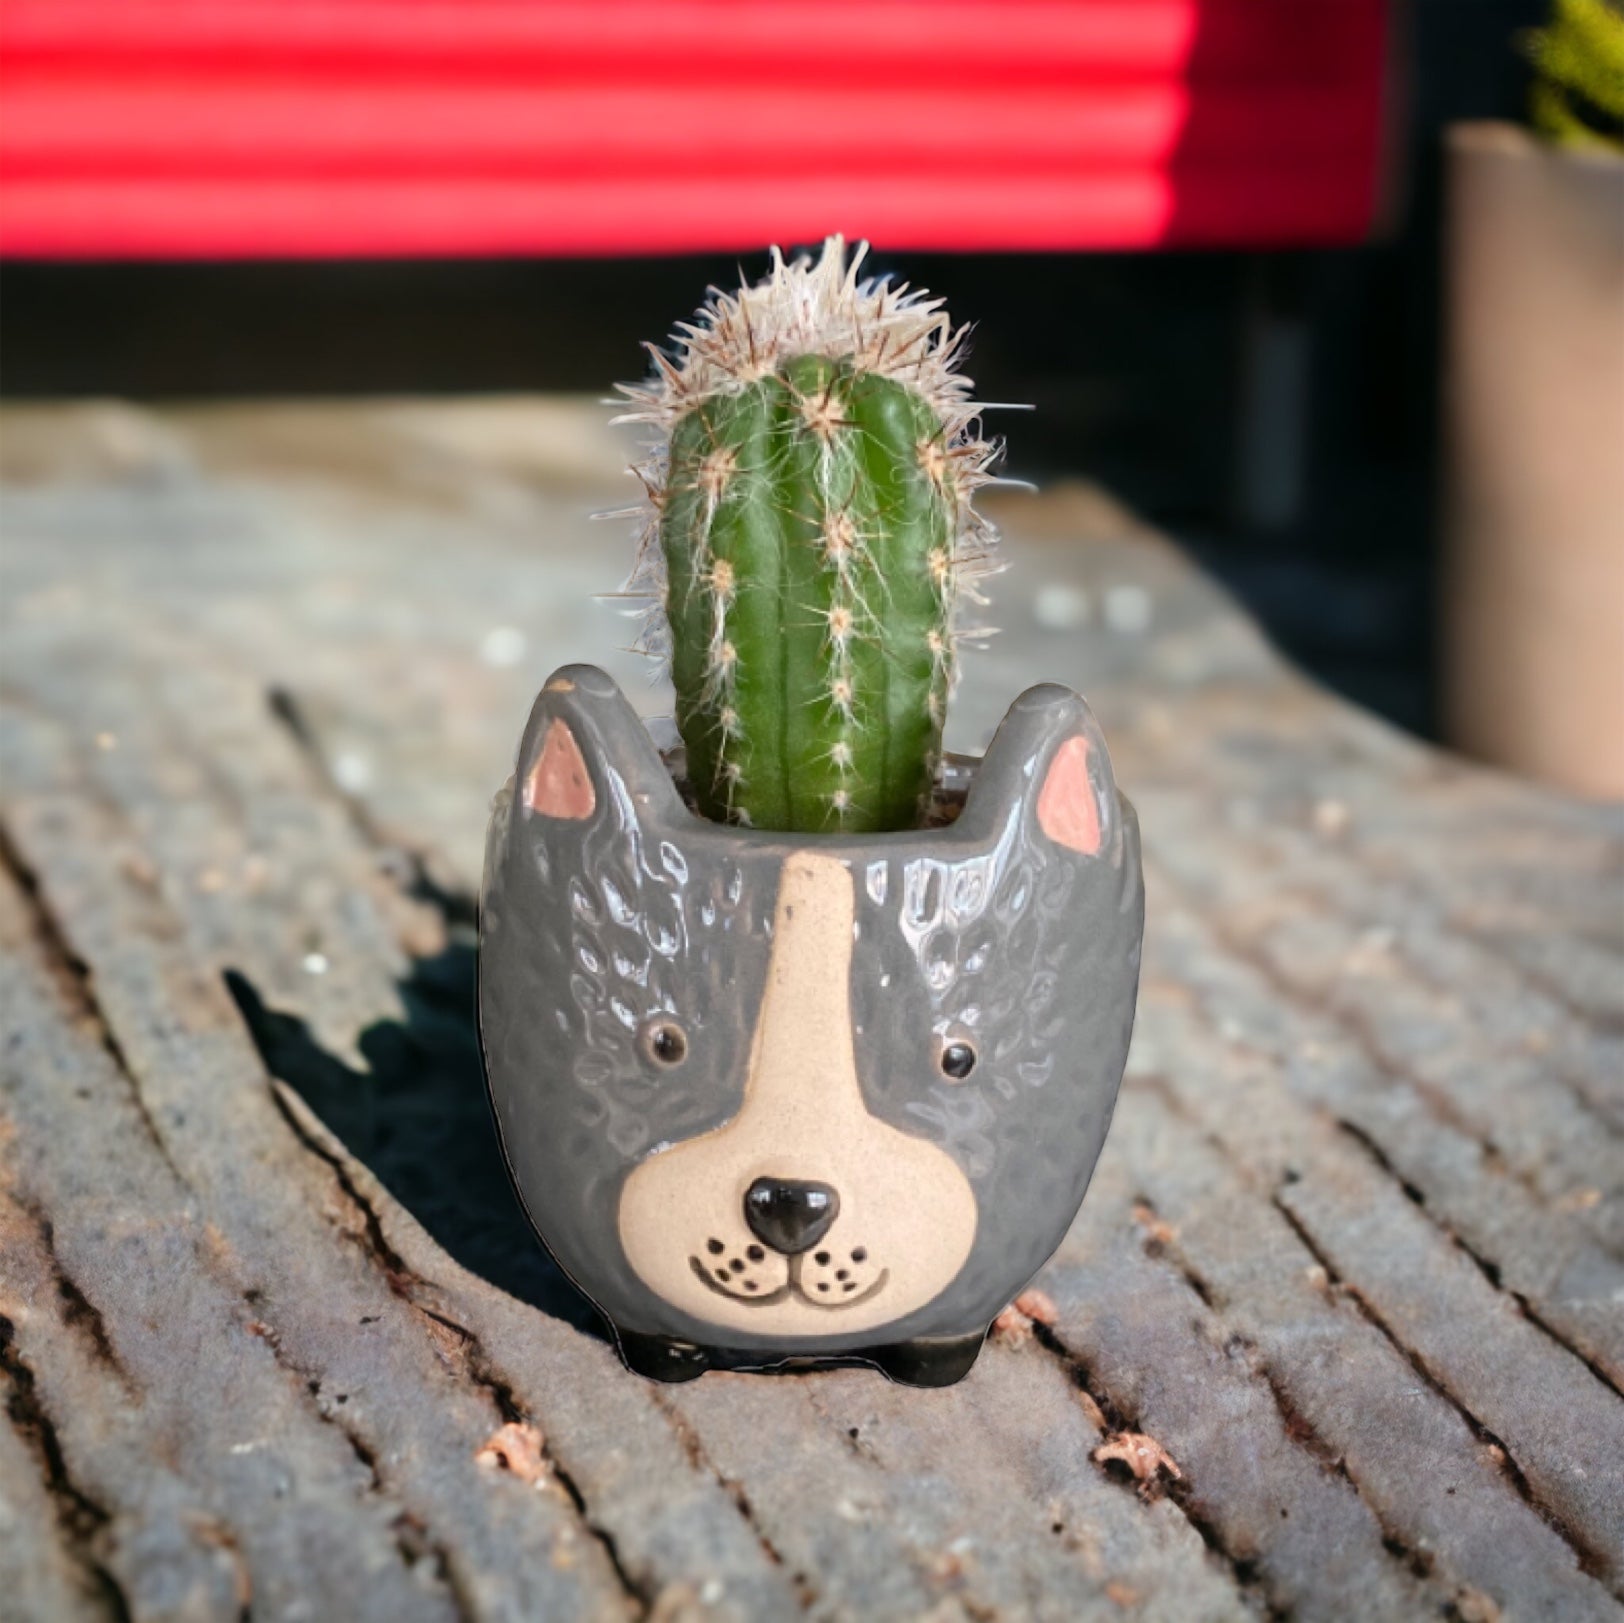 Plant Pot Planter Dog Rufus - The Renmy Store Homewares & Gifts 